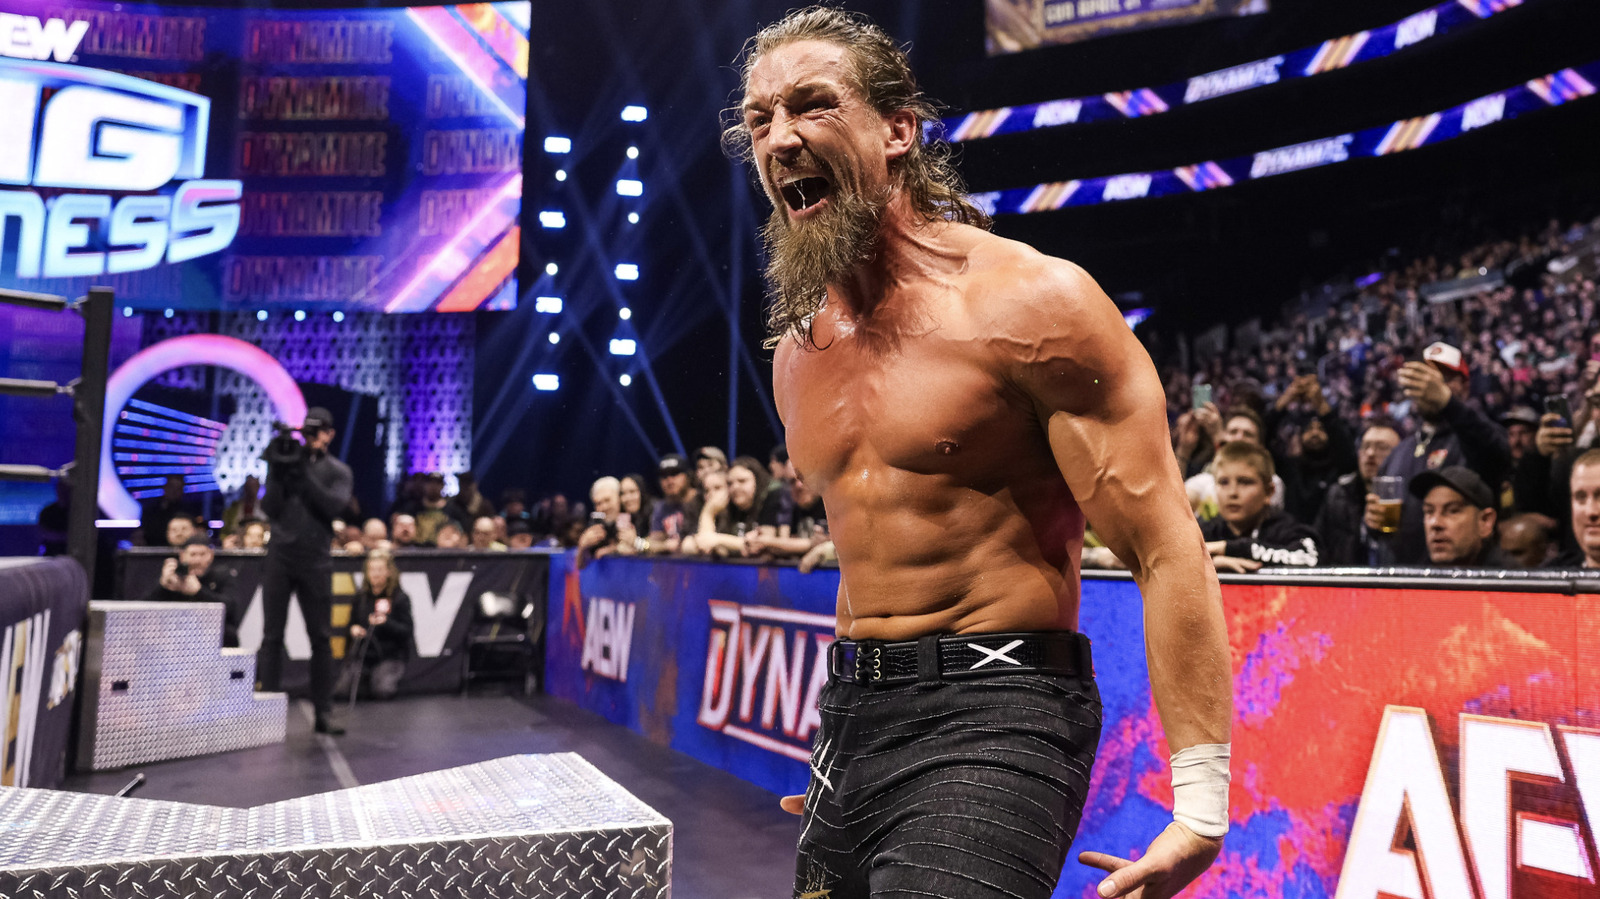 AEW Rampage Results 5/1 - Jay White Takes On Dante Martin And More